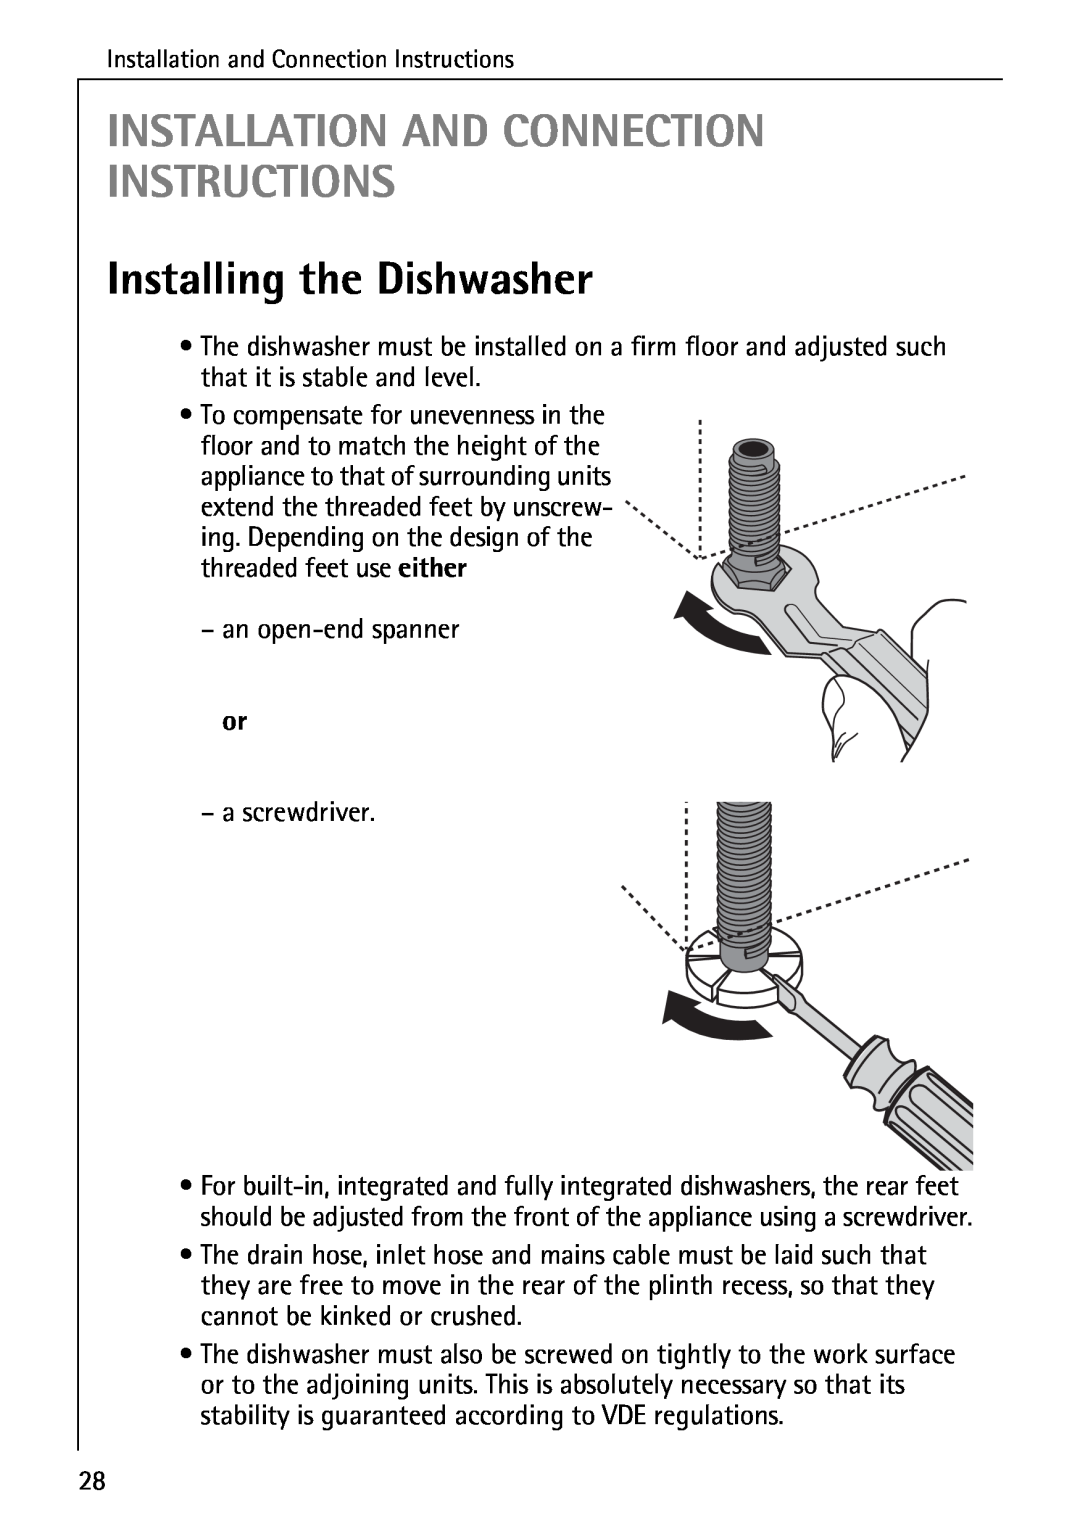 Electrolux 40250 i manual Installation And Connection Instructions, Installing the Dishwasher 